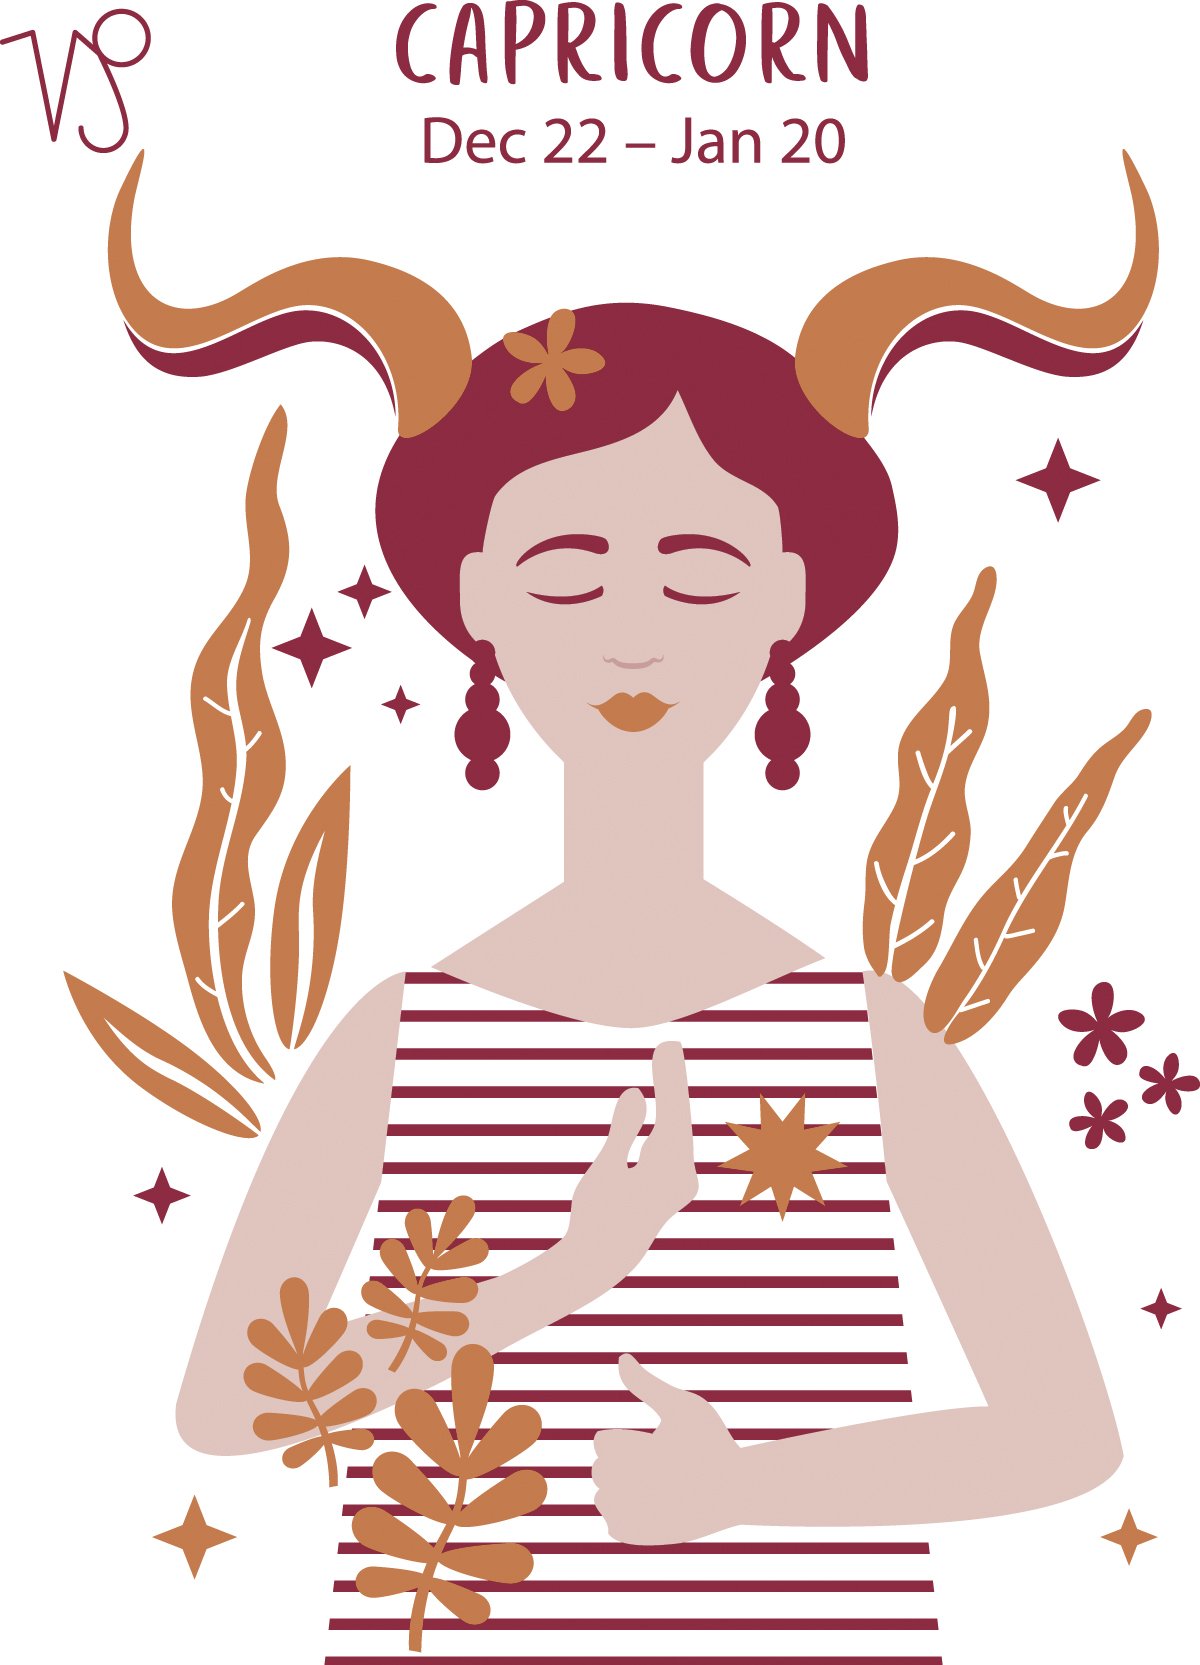 Capricorn (Dec 22 - Jan 20) represented by a woman with horns. | Photo: AmoMama